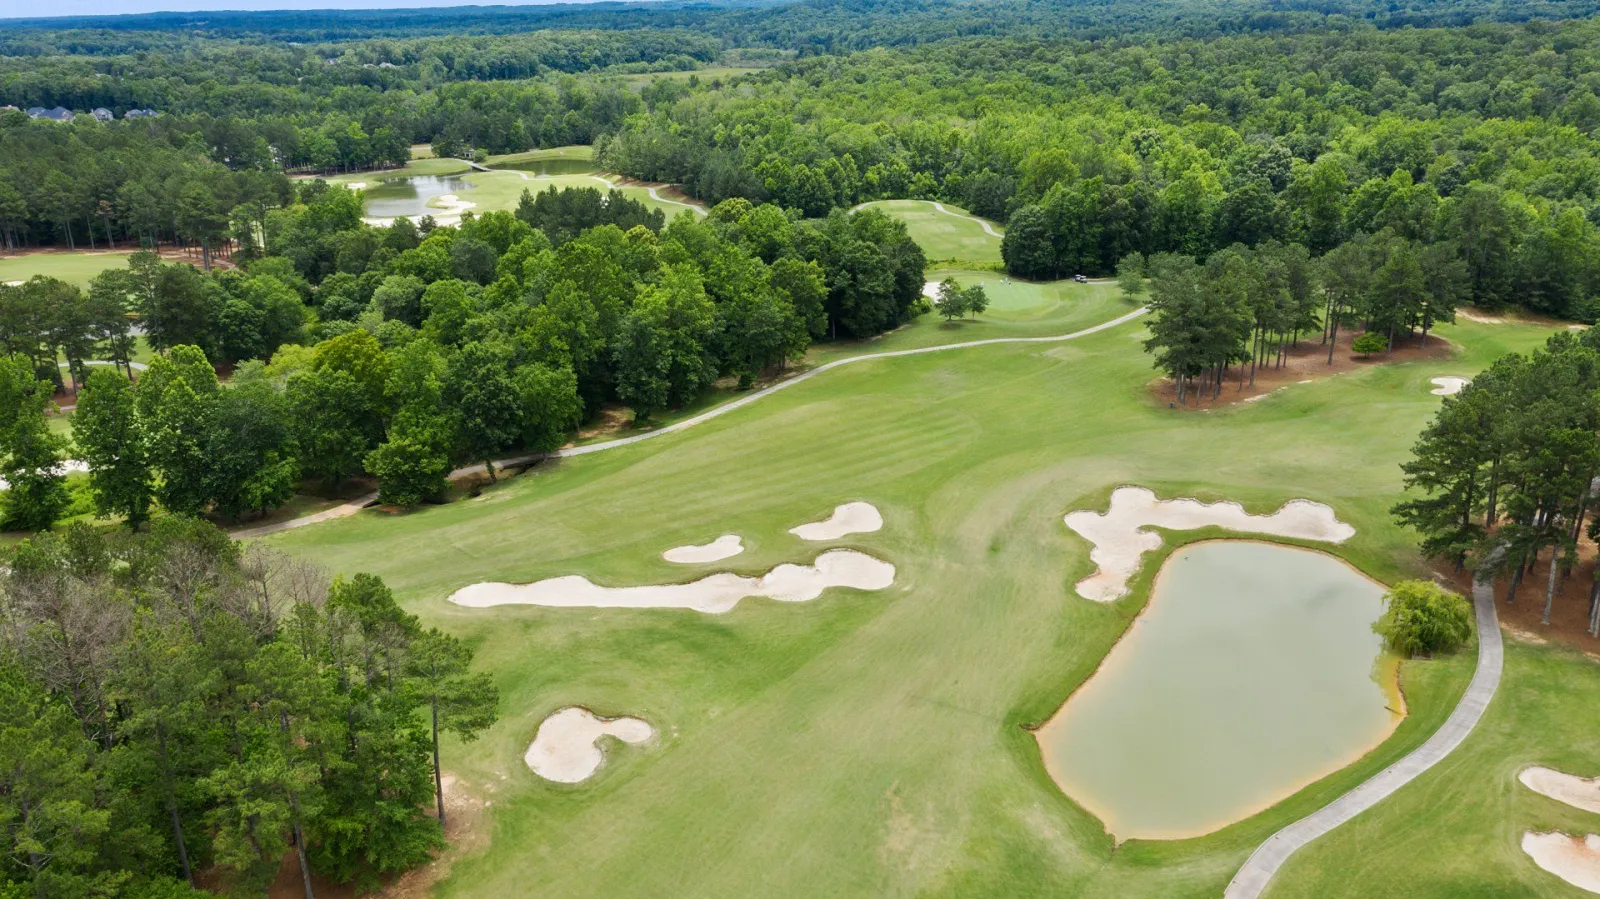 an overhead view of The Frog golf course